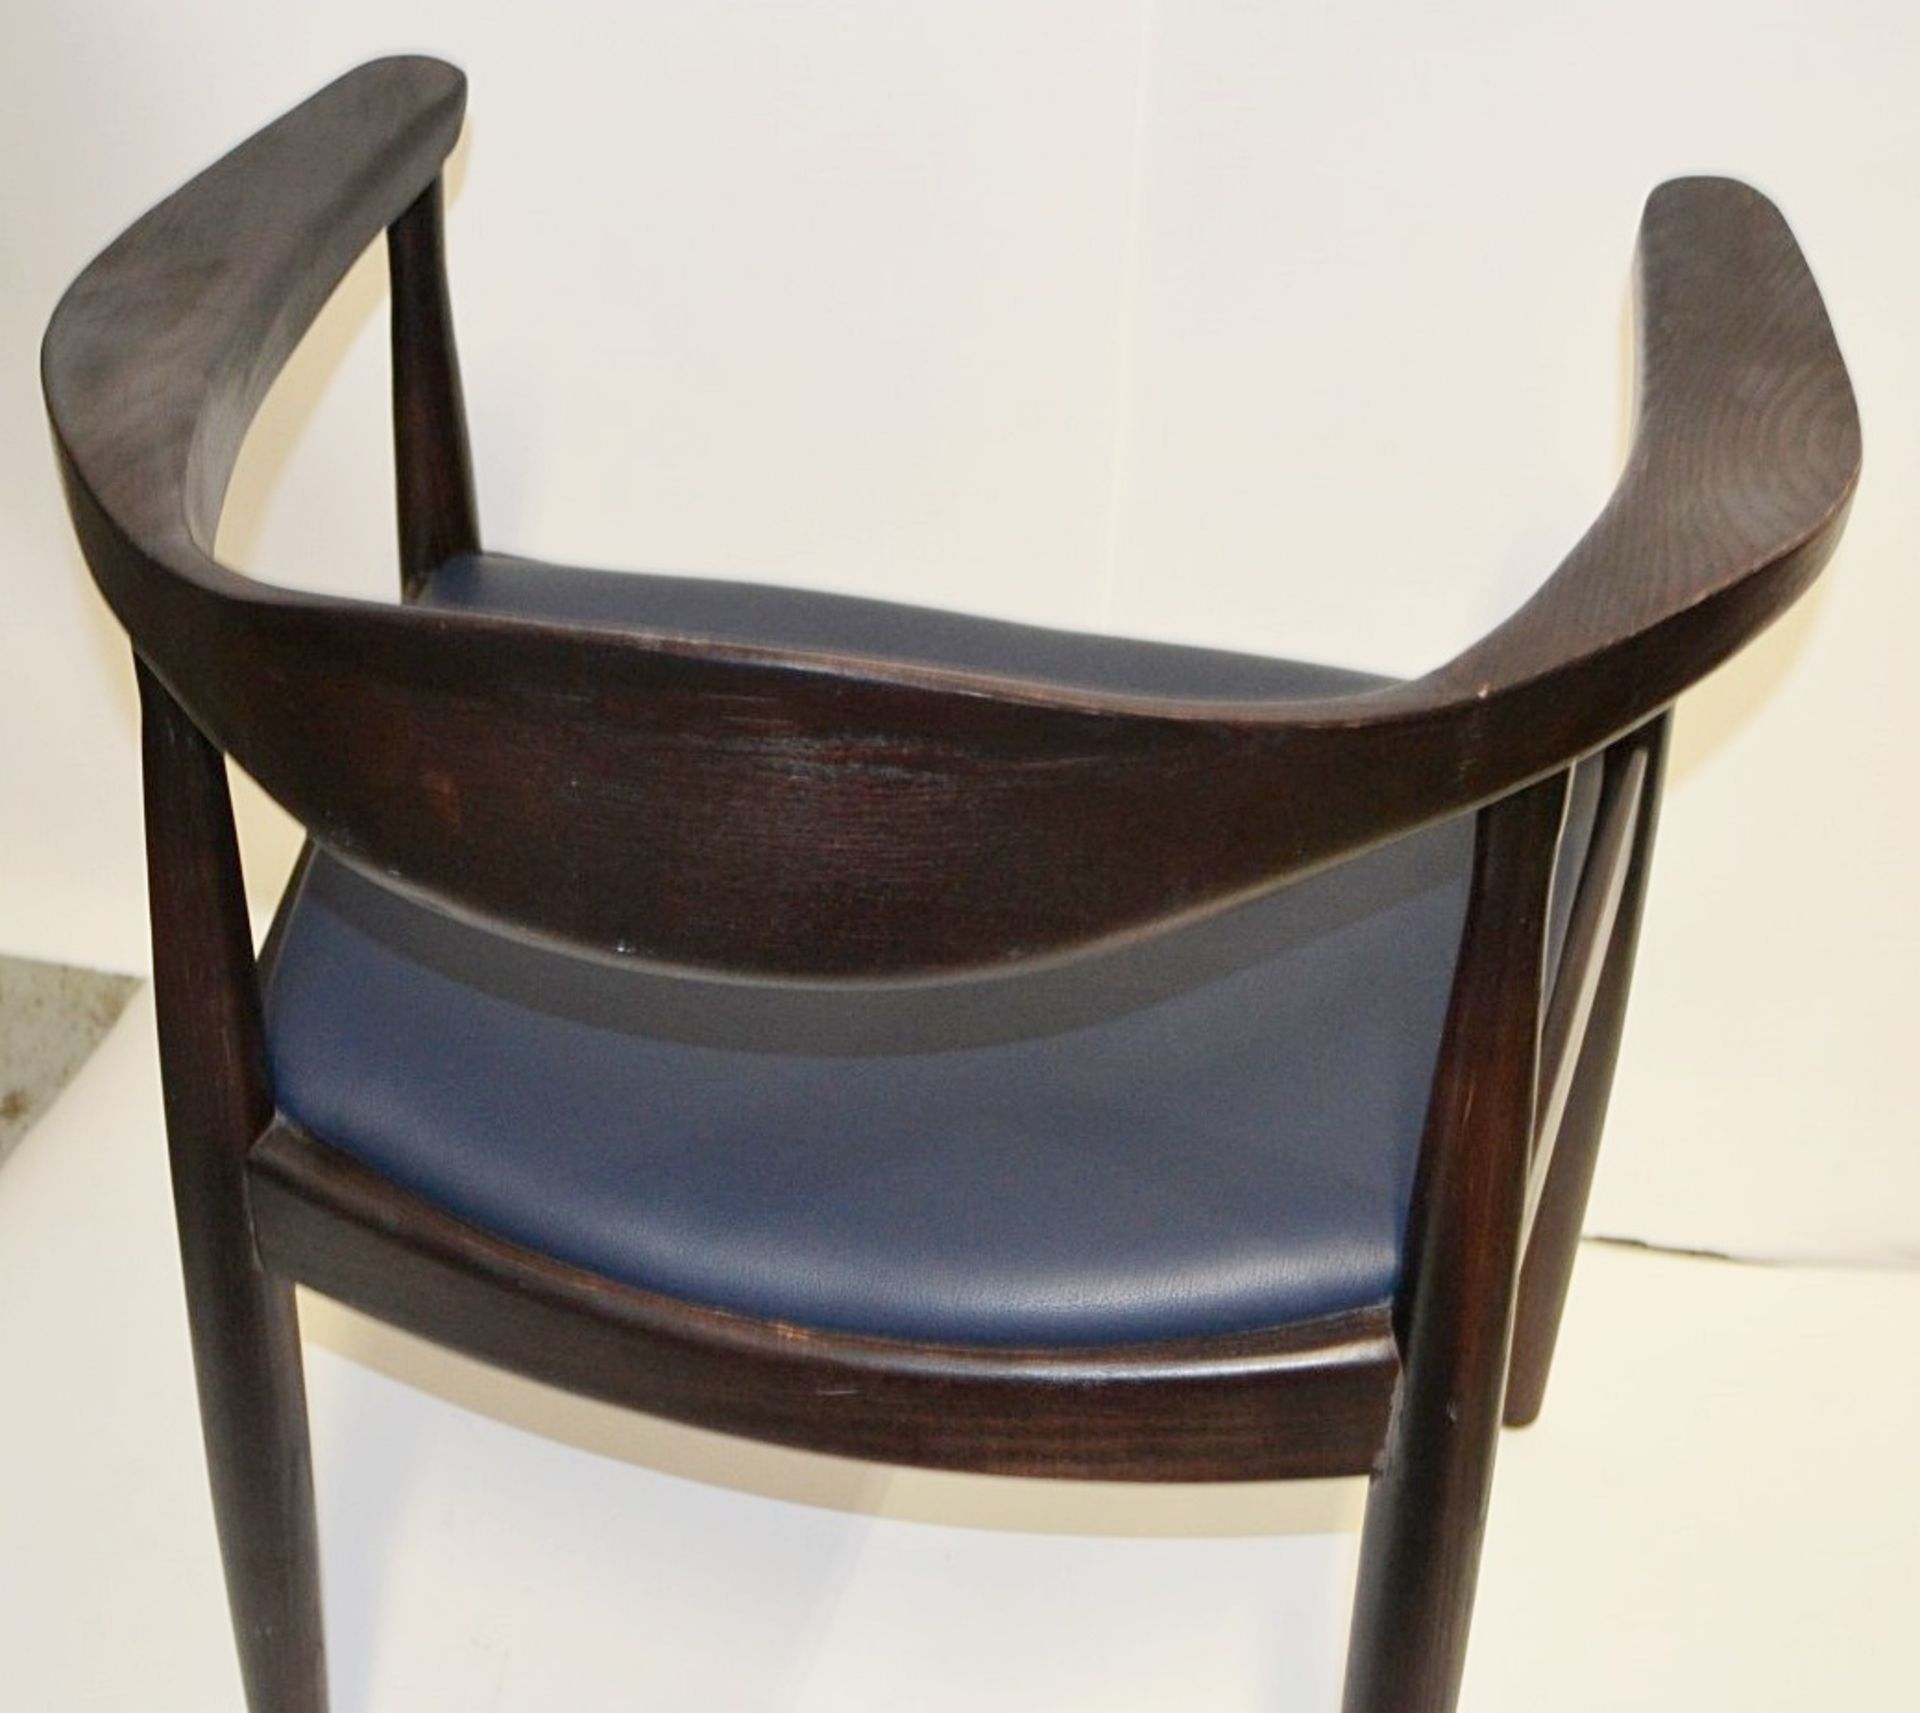 4 x Wooden Restaurant Dining Chairs - Ash Wood Dining Chairs With Dark Finish and Leather - Image 4 of 4